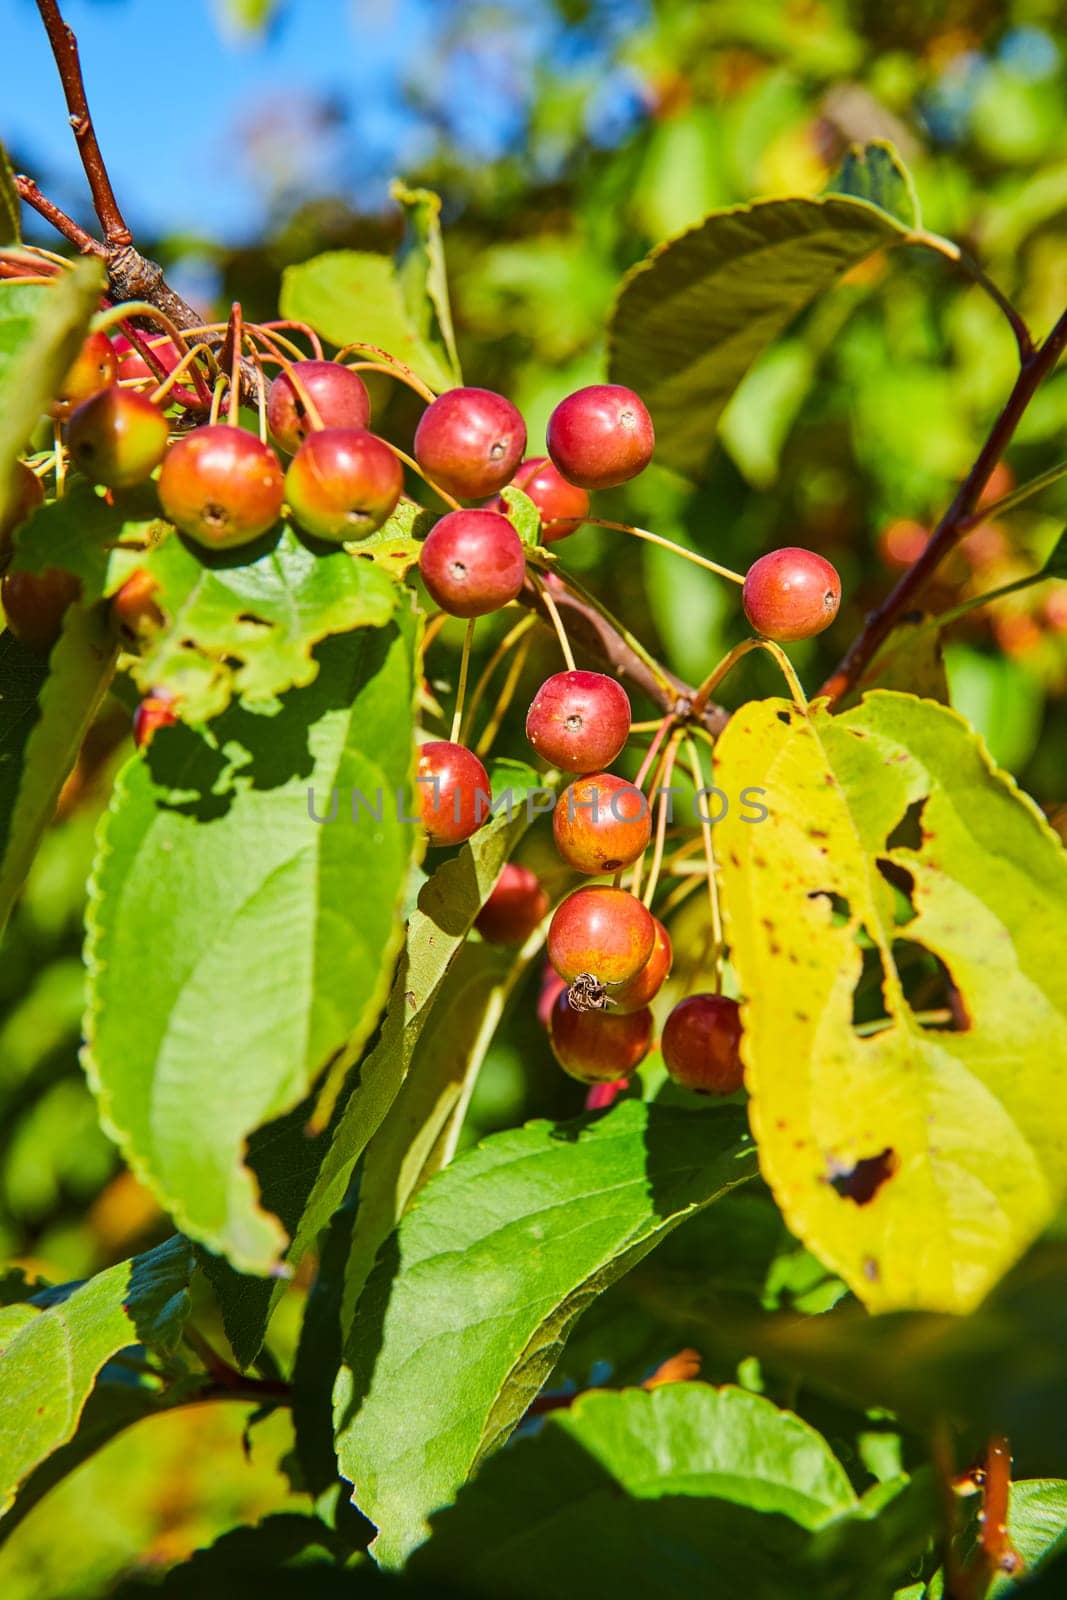 Ripe Red Berries with Autumn Leaves under Blue Sky by njproductions